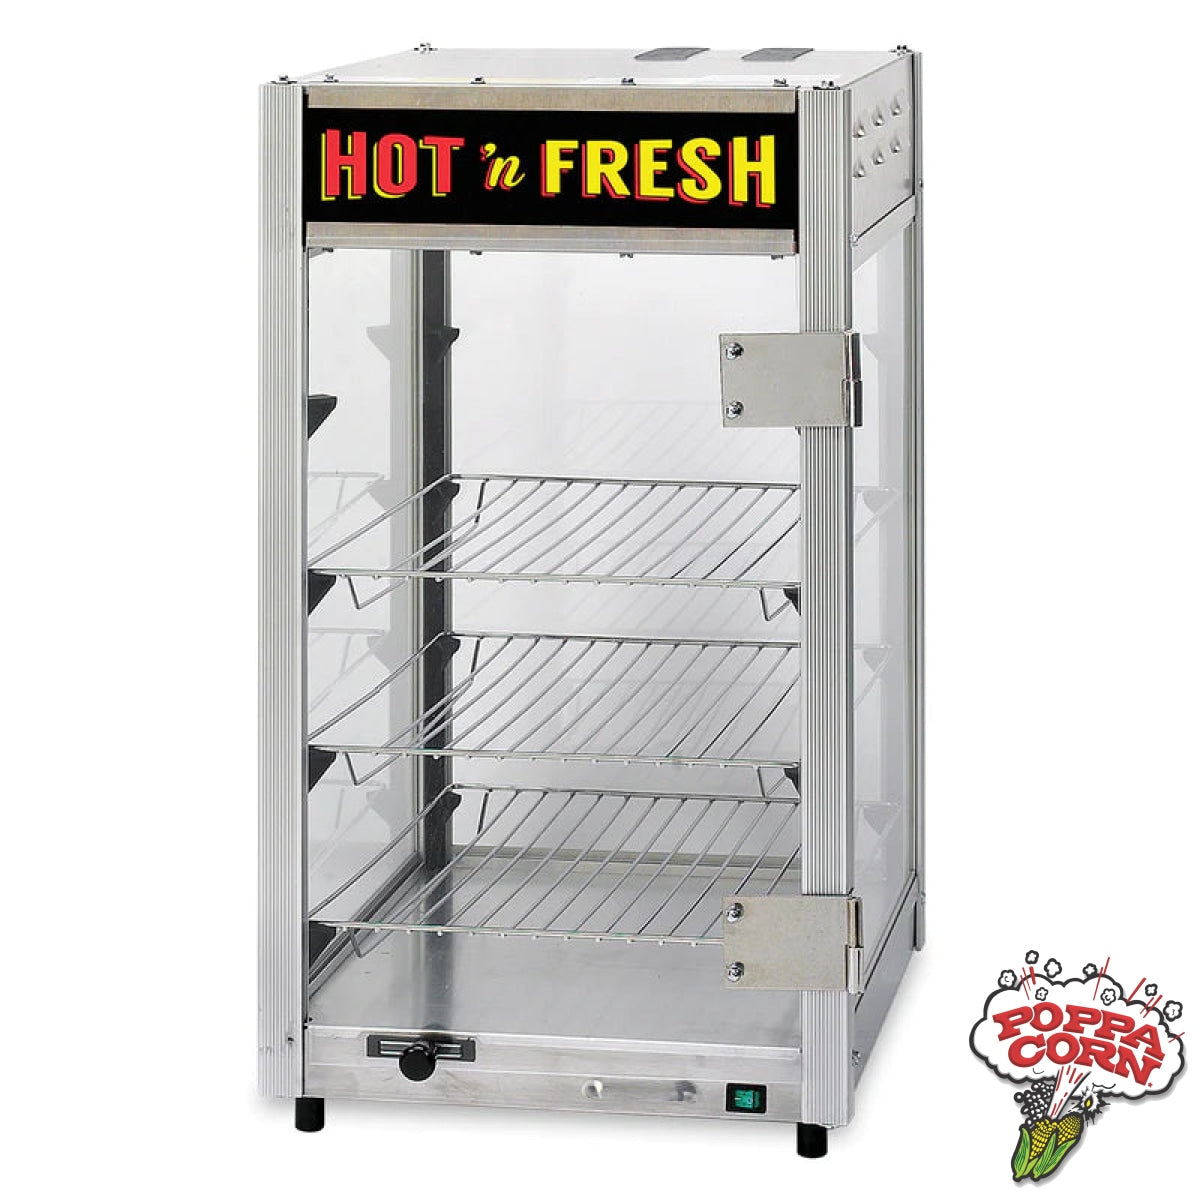 Food Holding Cabinet for Hot/Volatile Foods - GM5587-00-100 - Poppa Corn Corp